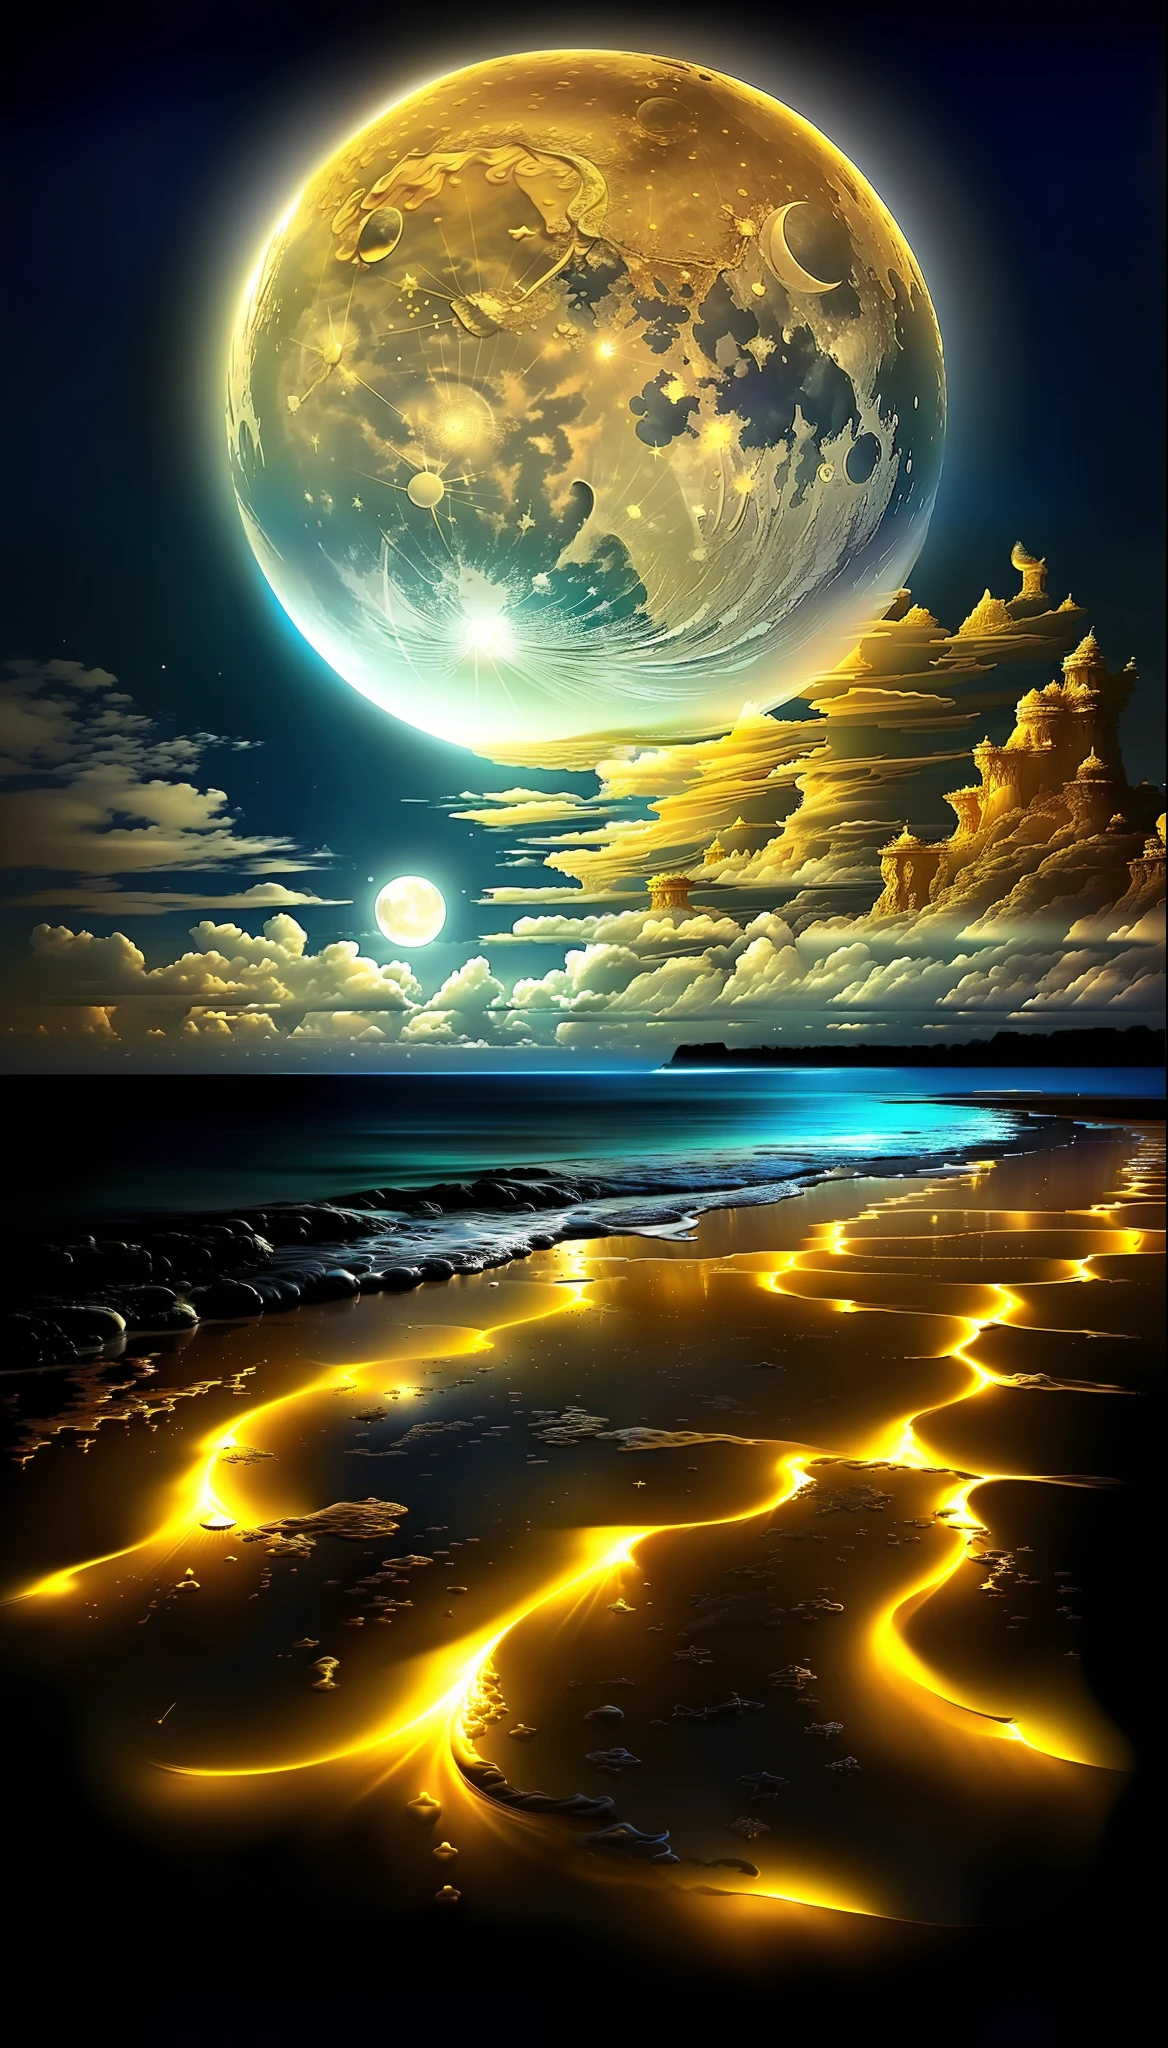 a painting of a beach with a golden full moon and some clouds, magical beach, sandy white moon landscape, surreal space, magnificent background, beautiful image already created, universe in a grain of sand, magical ocean blue drops, detailed dreamscape, moon shining golden light, beautiful breathtaking dreamer, in the astral plane ) ), stunning screensaver,  beautiful space, beautiful moonlight